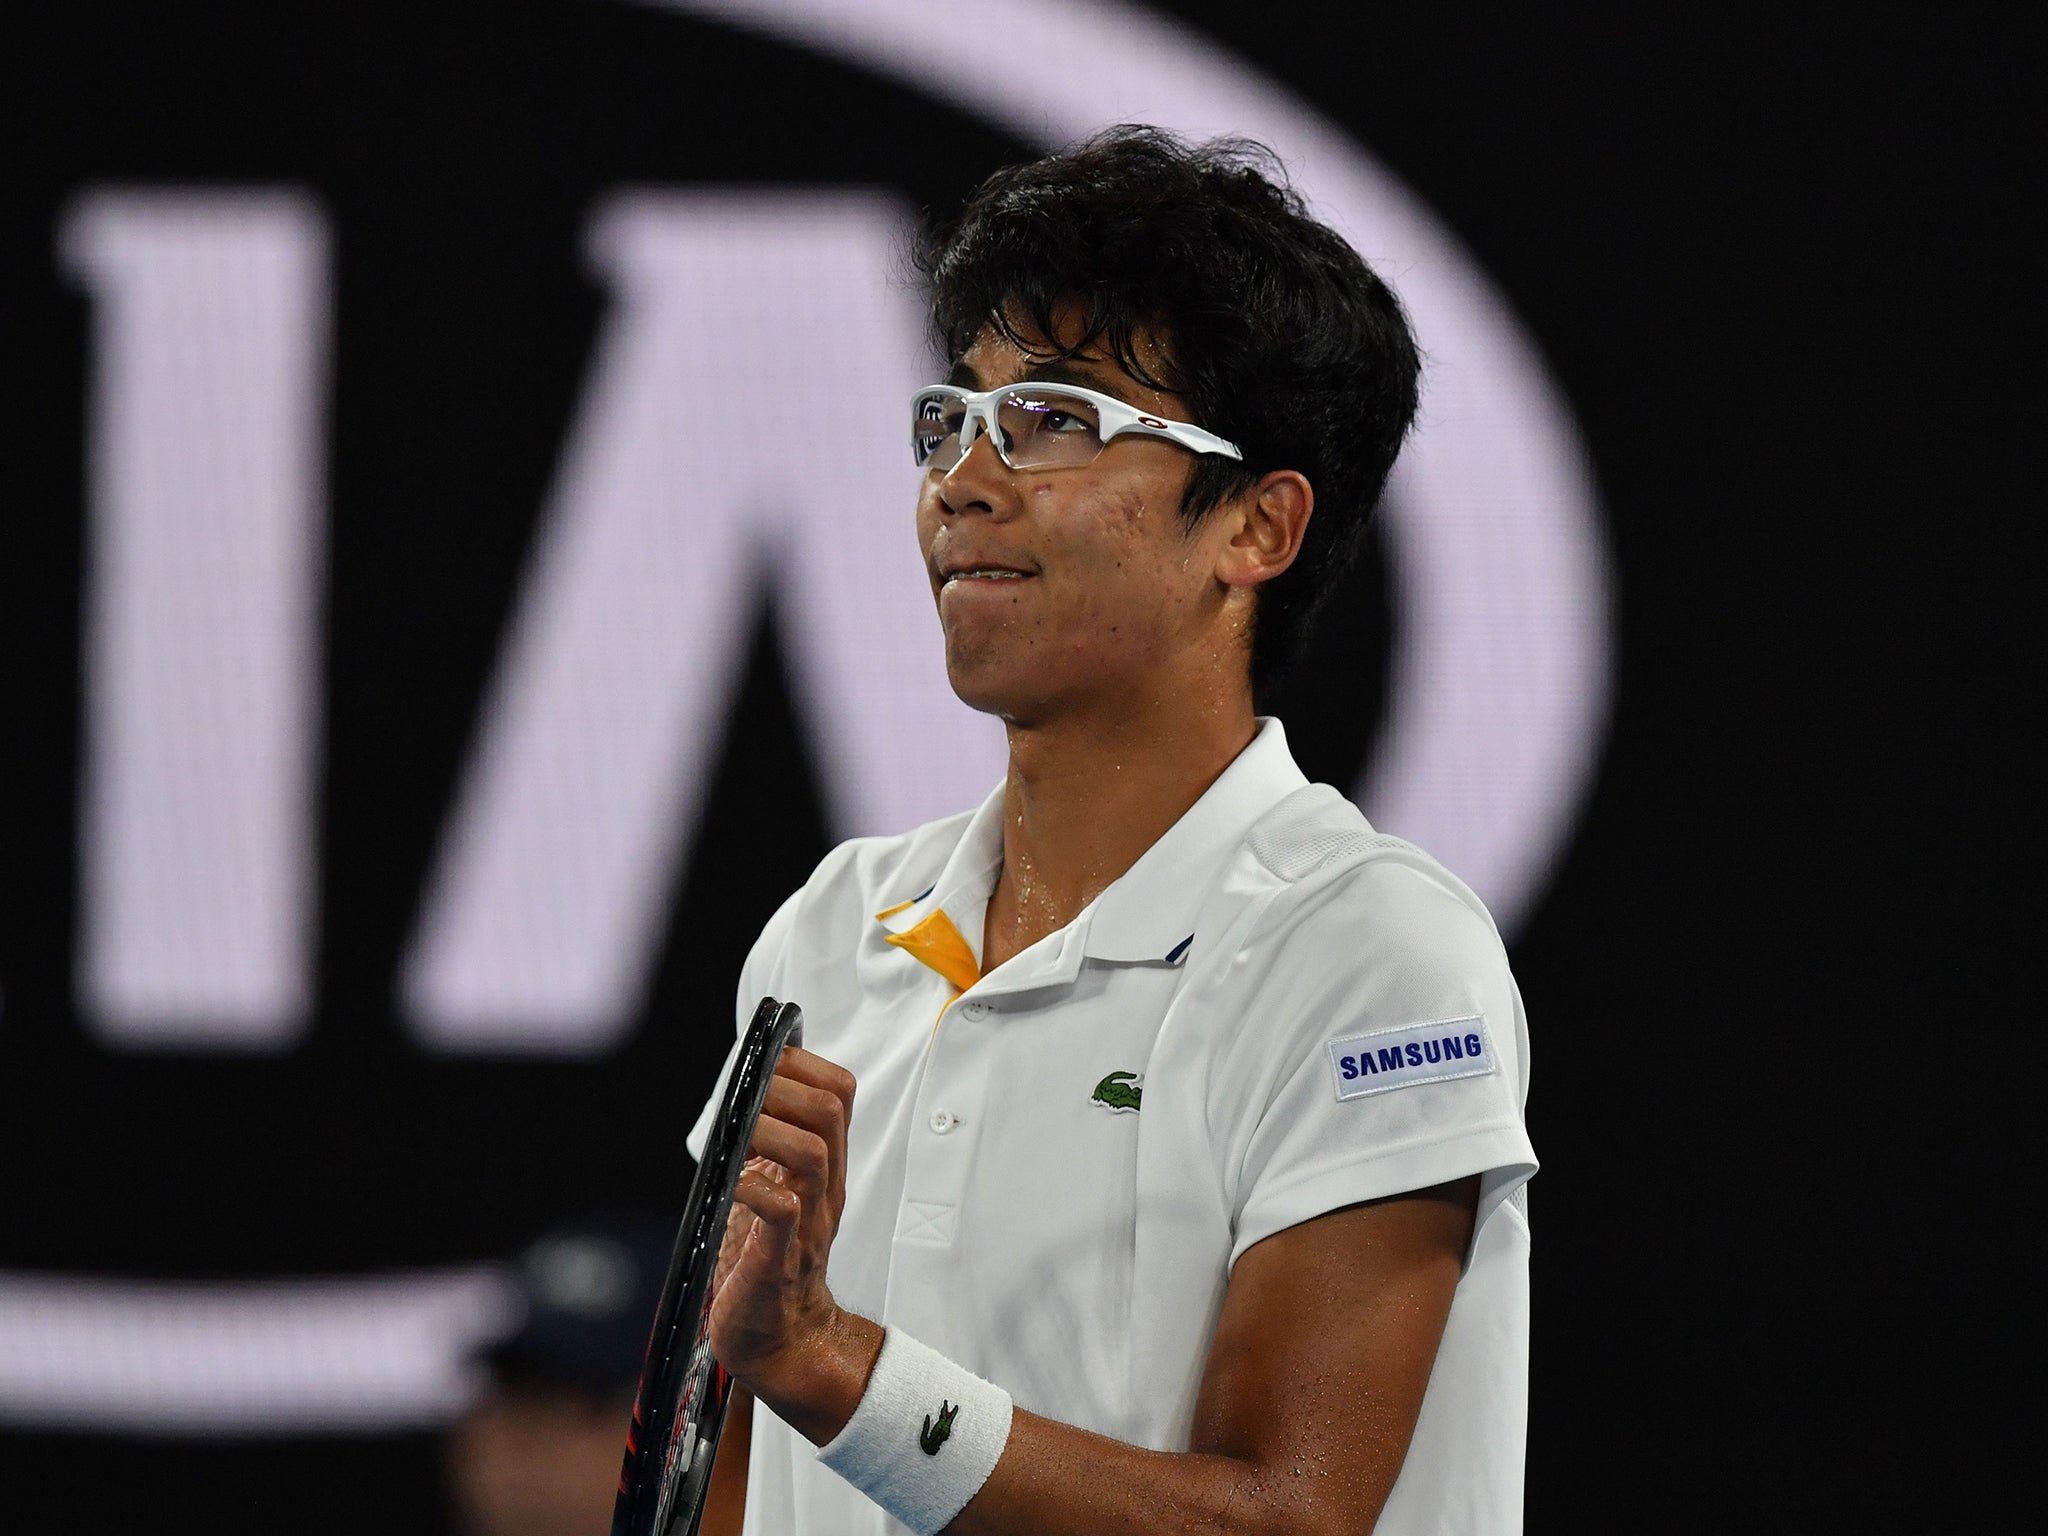 Chung's impressive run at the Australian Open came to an end in the semi-finals